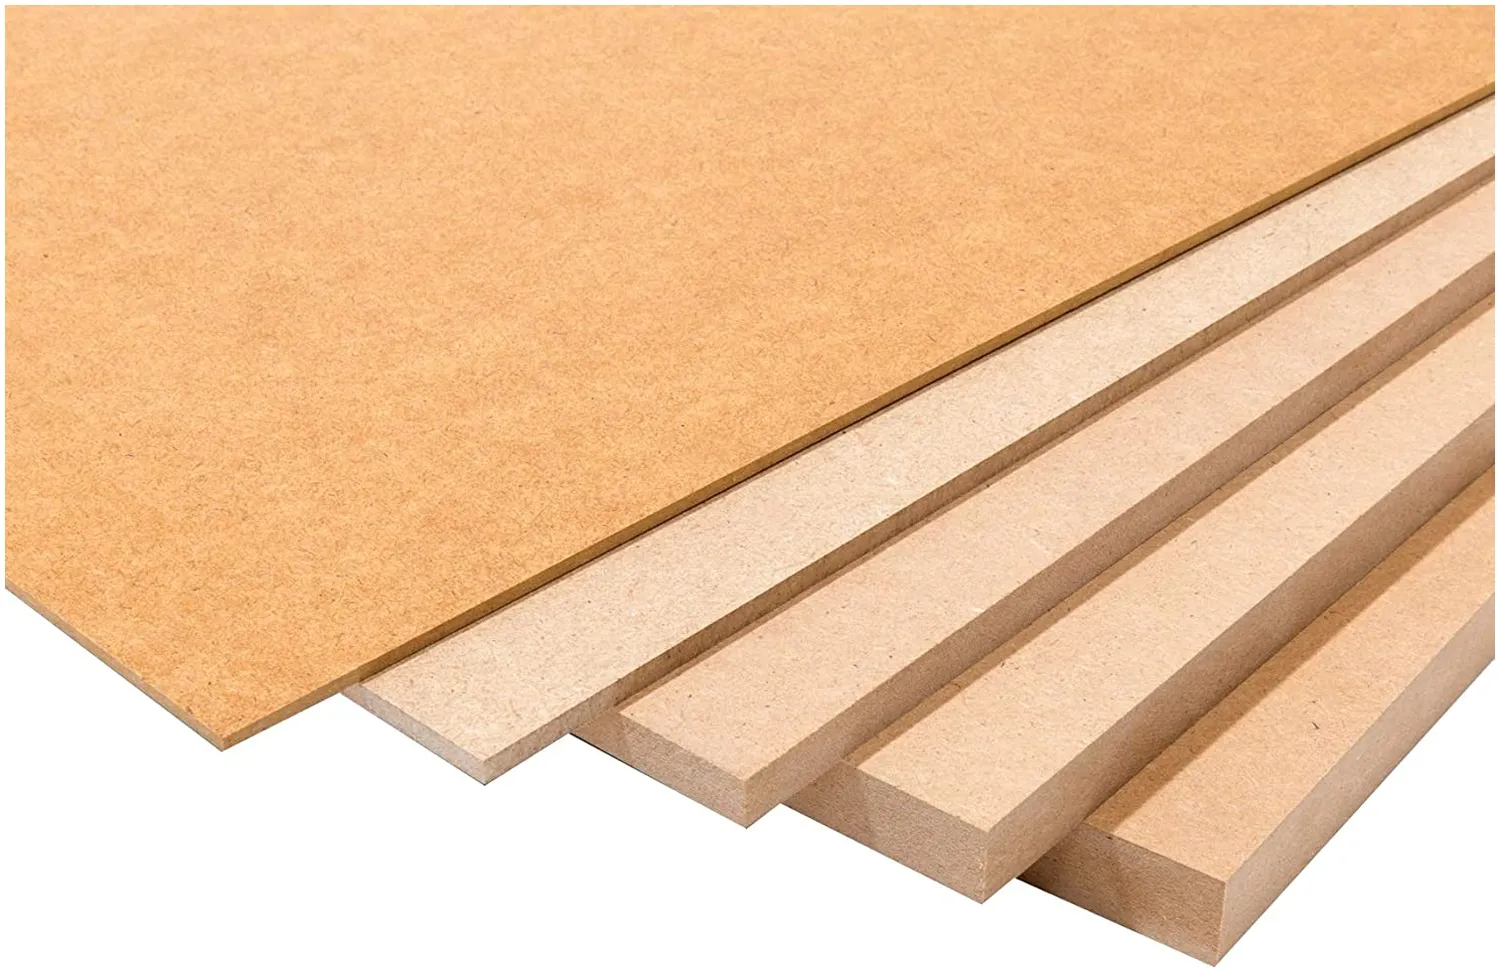 frequently asked questions about mdf board